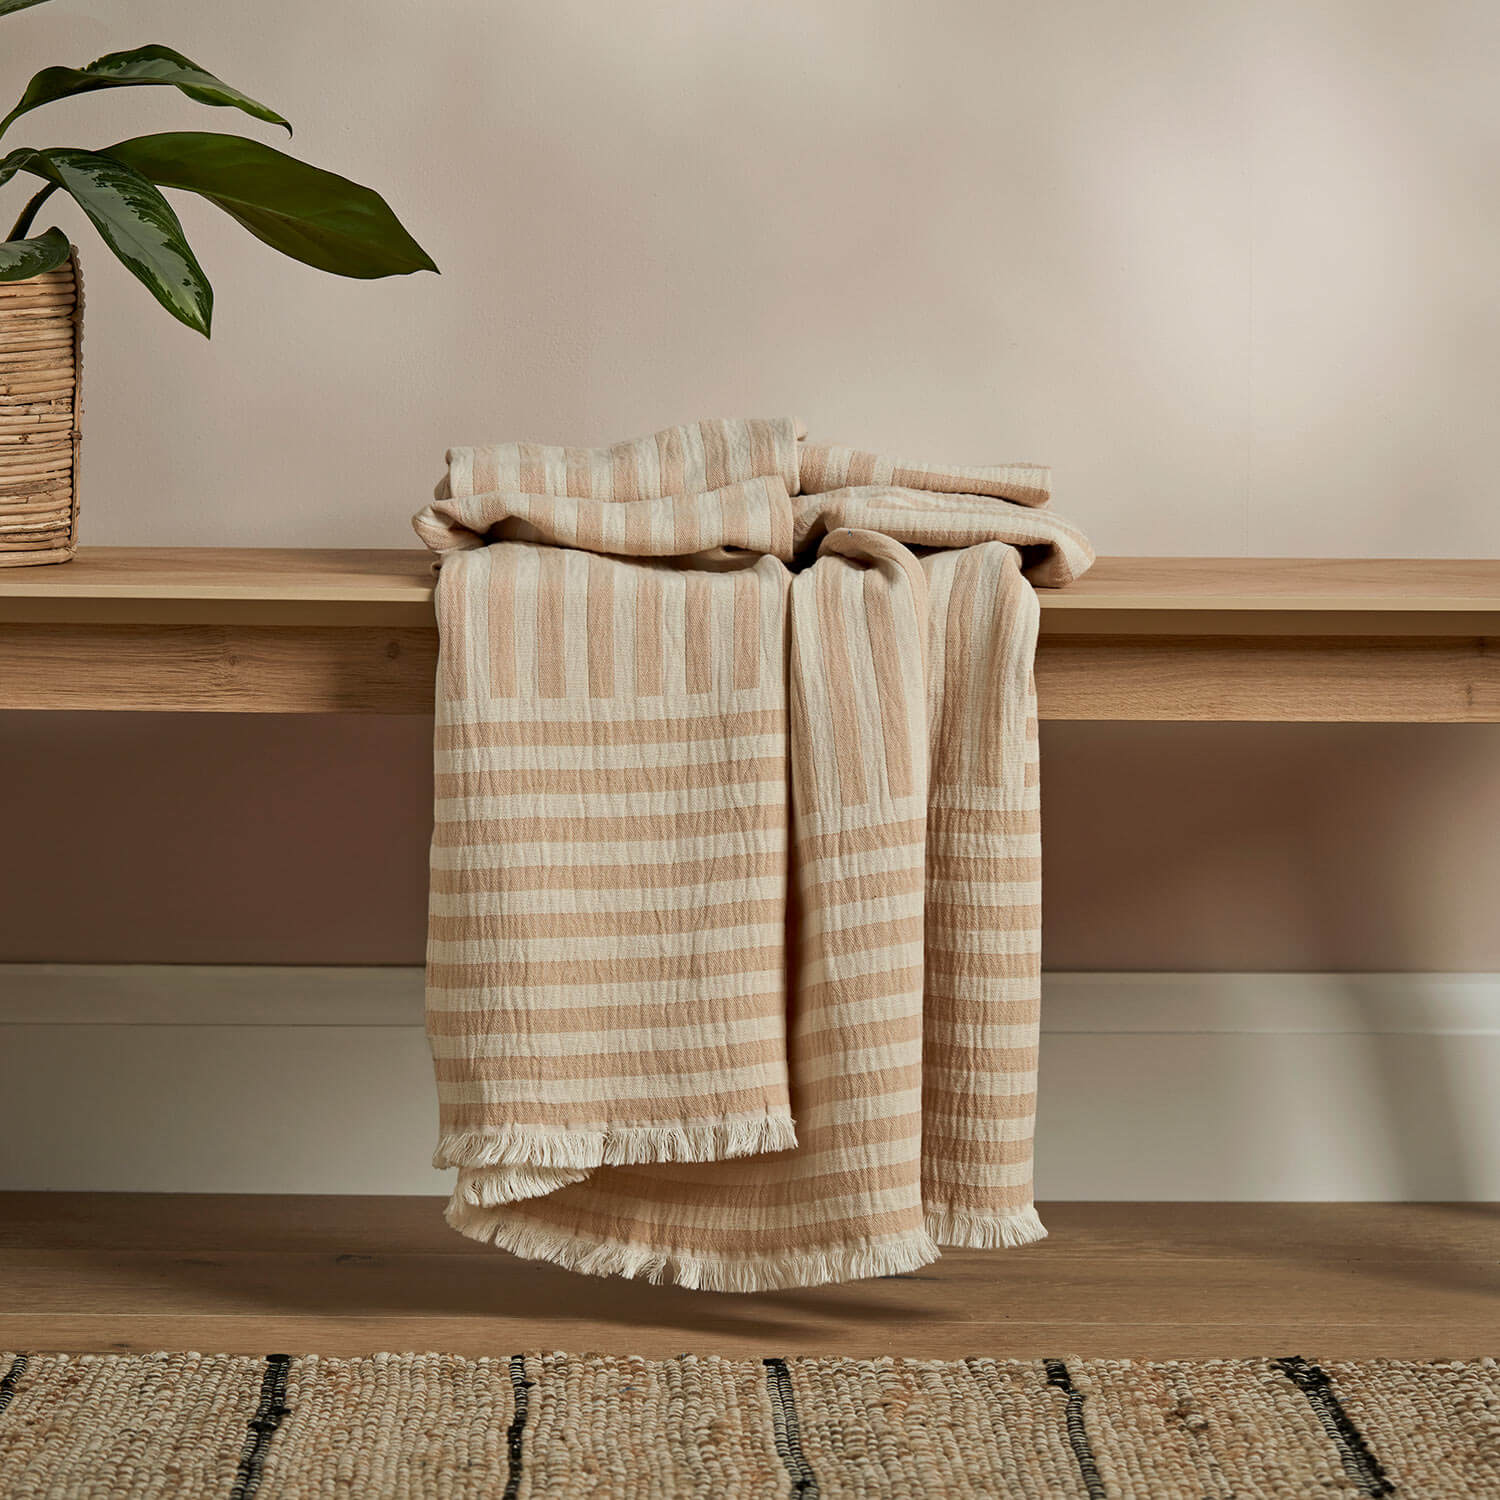 Cosdon throw in beige placed on a wooden bench with a plant placed to the side of it